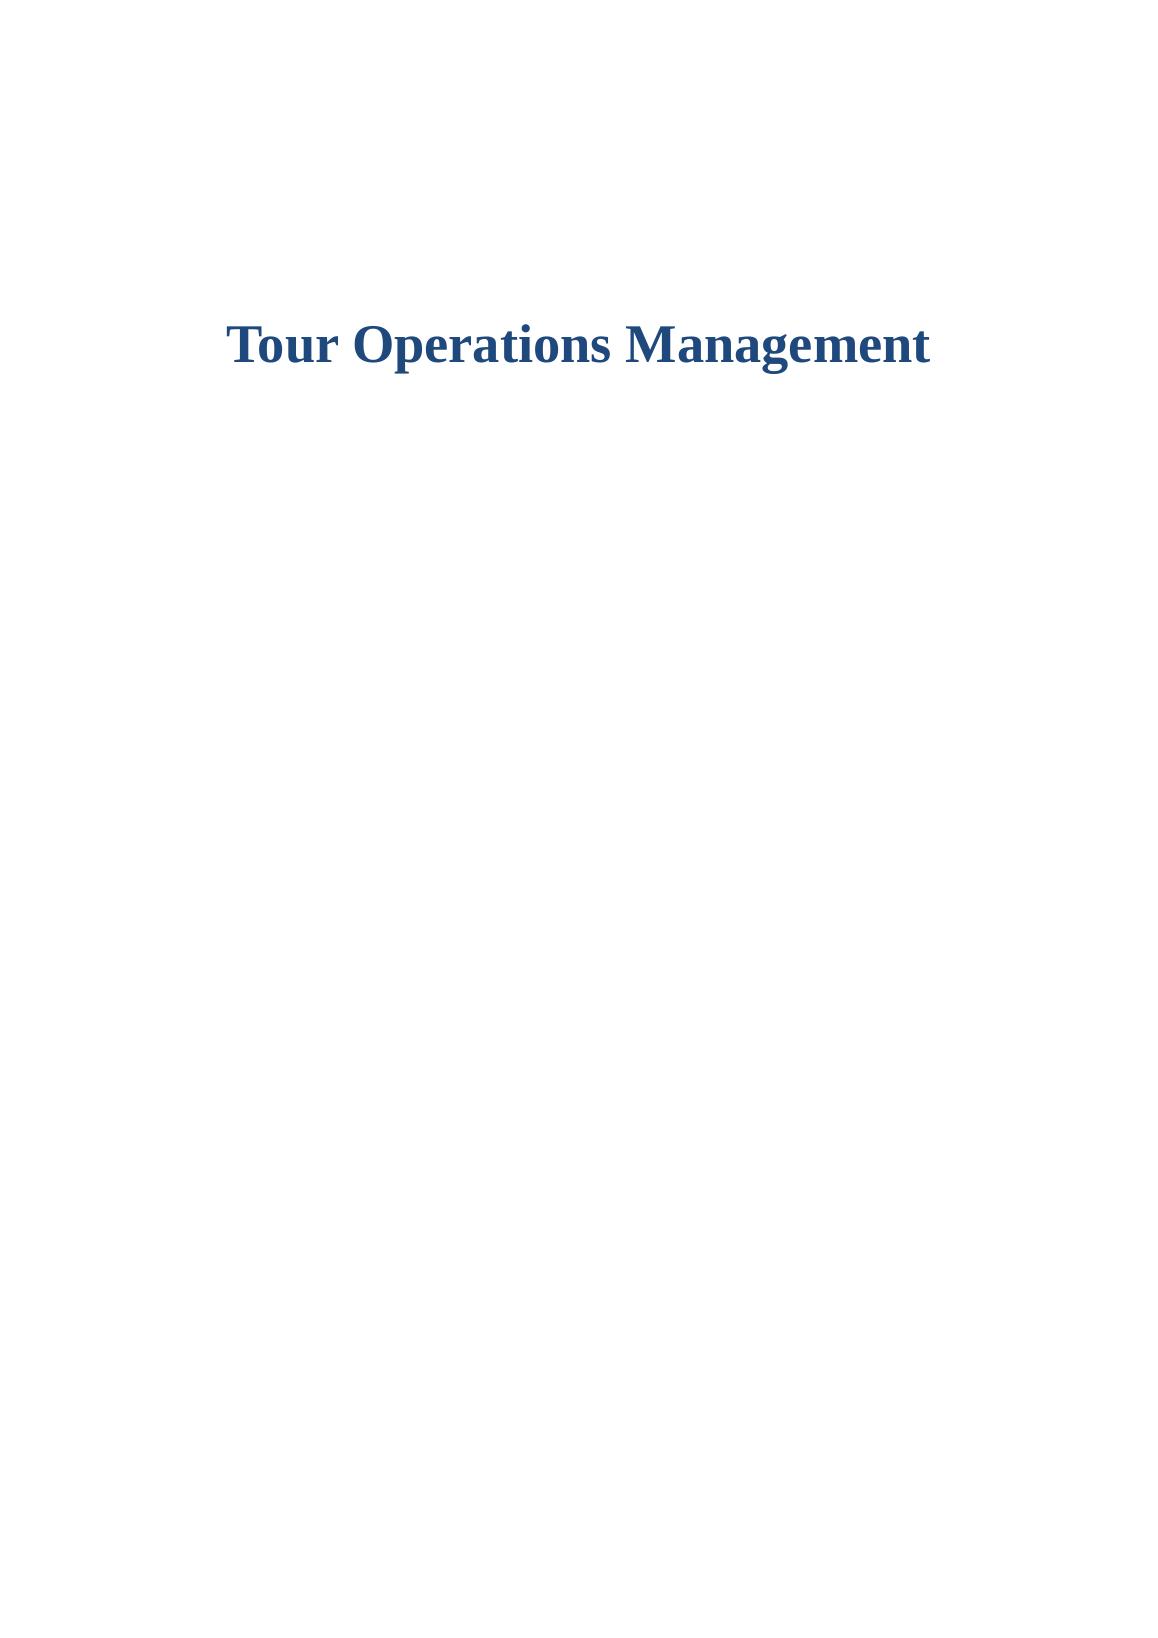 (solved) Tour Operations Management Assignment - Thomas Cook_1